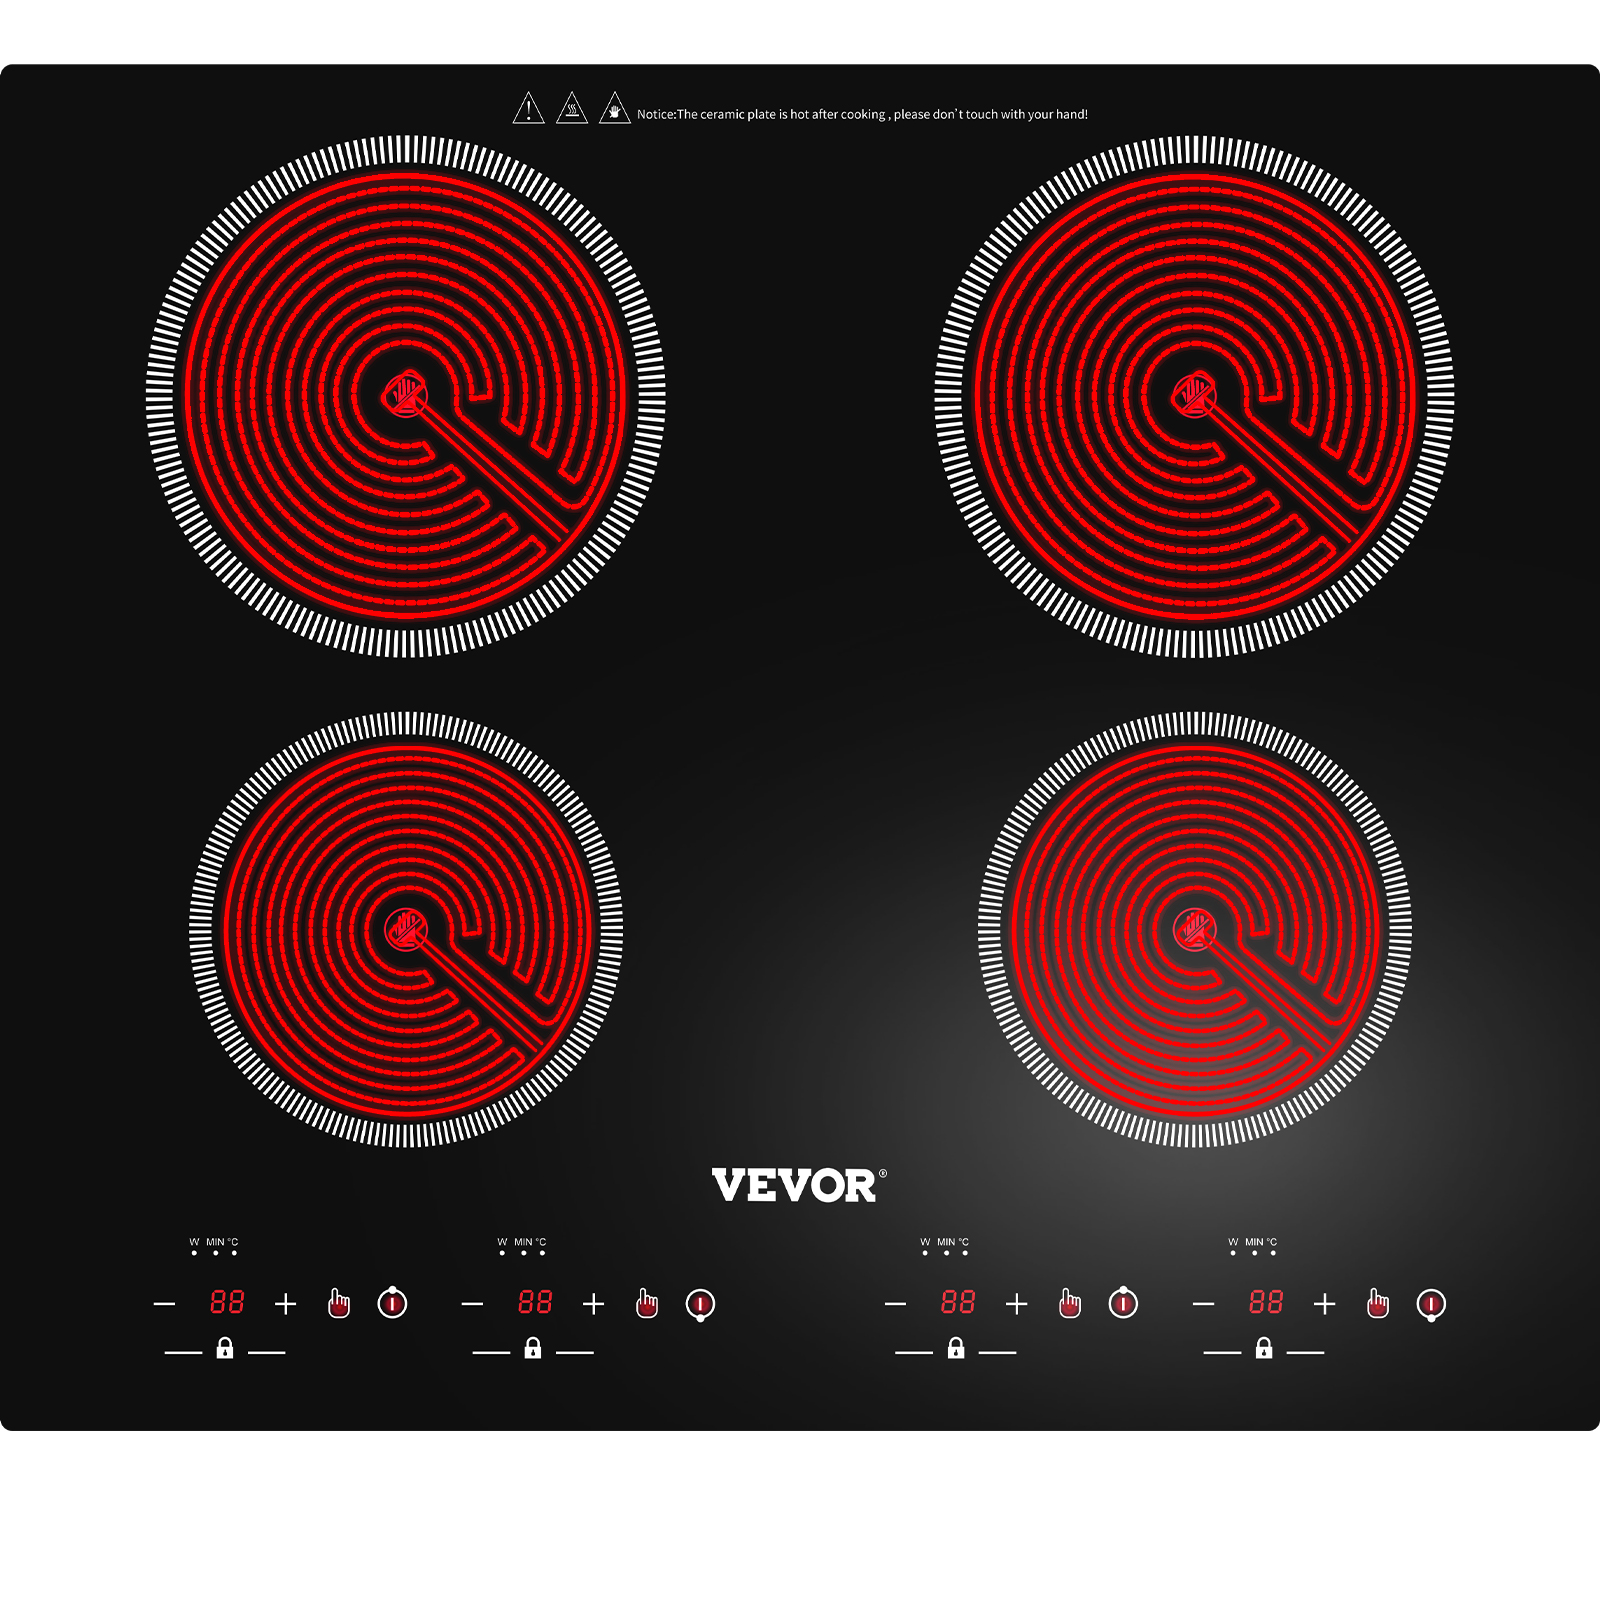 Built-in Radiant Cooktop,4 Burners,Sensor Touch Control